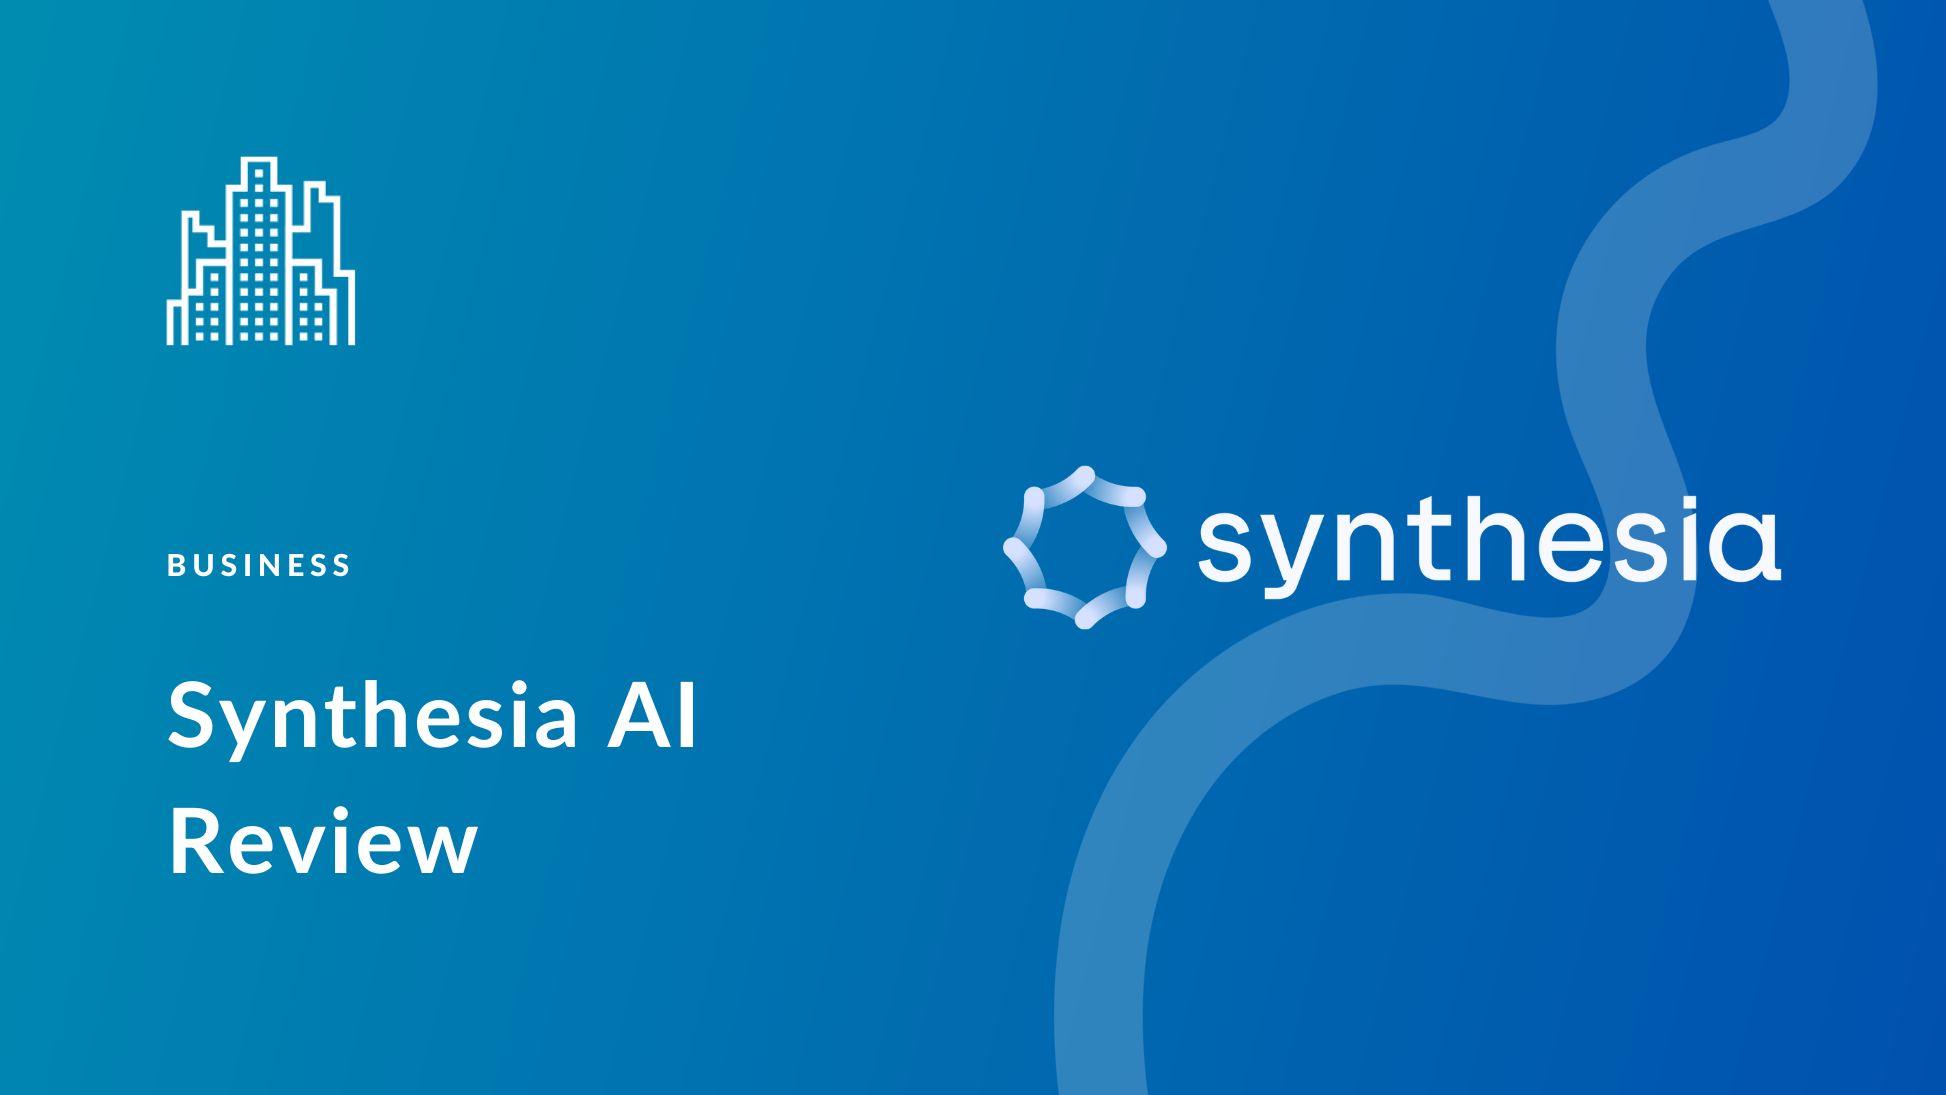 Synthesia AI Avatar Generator Review